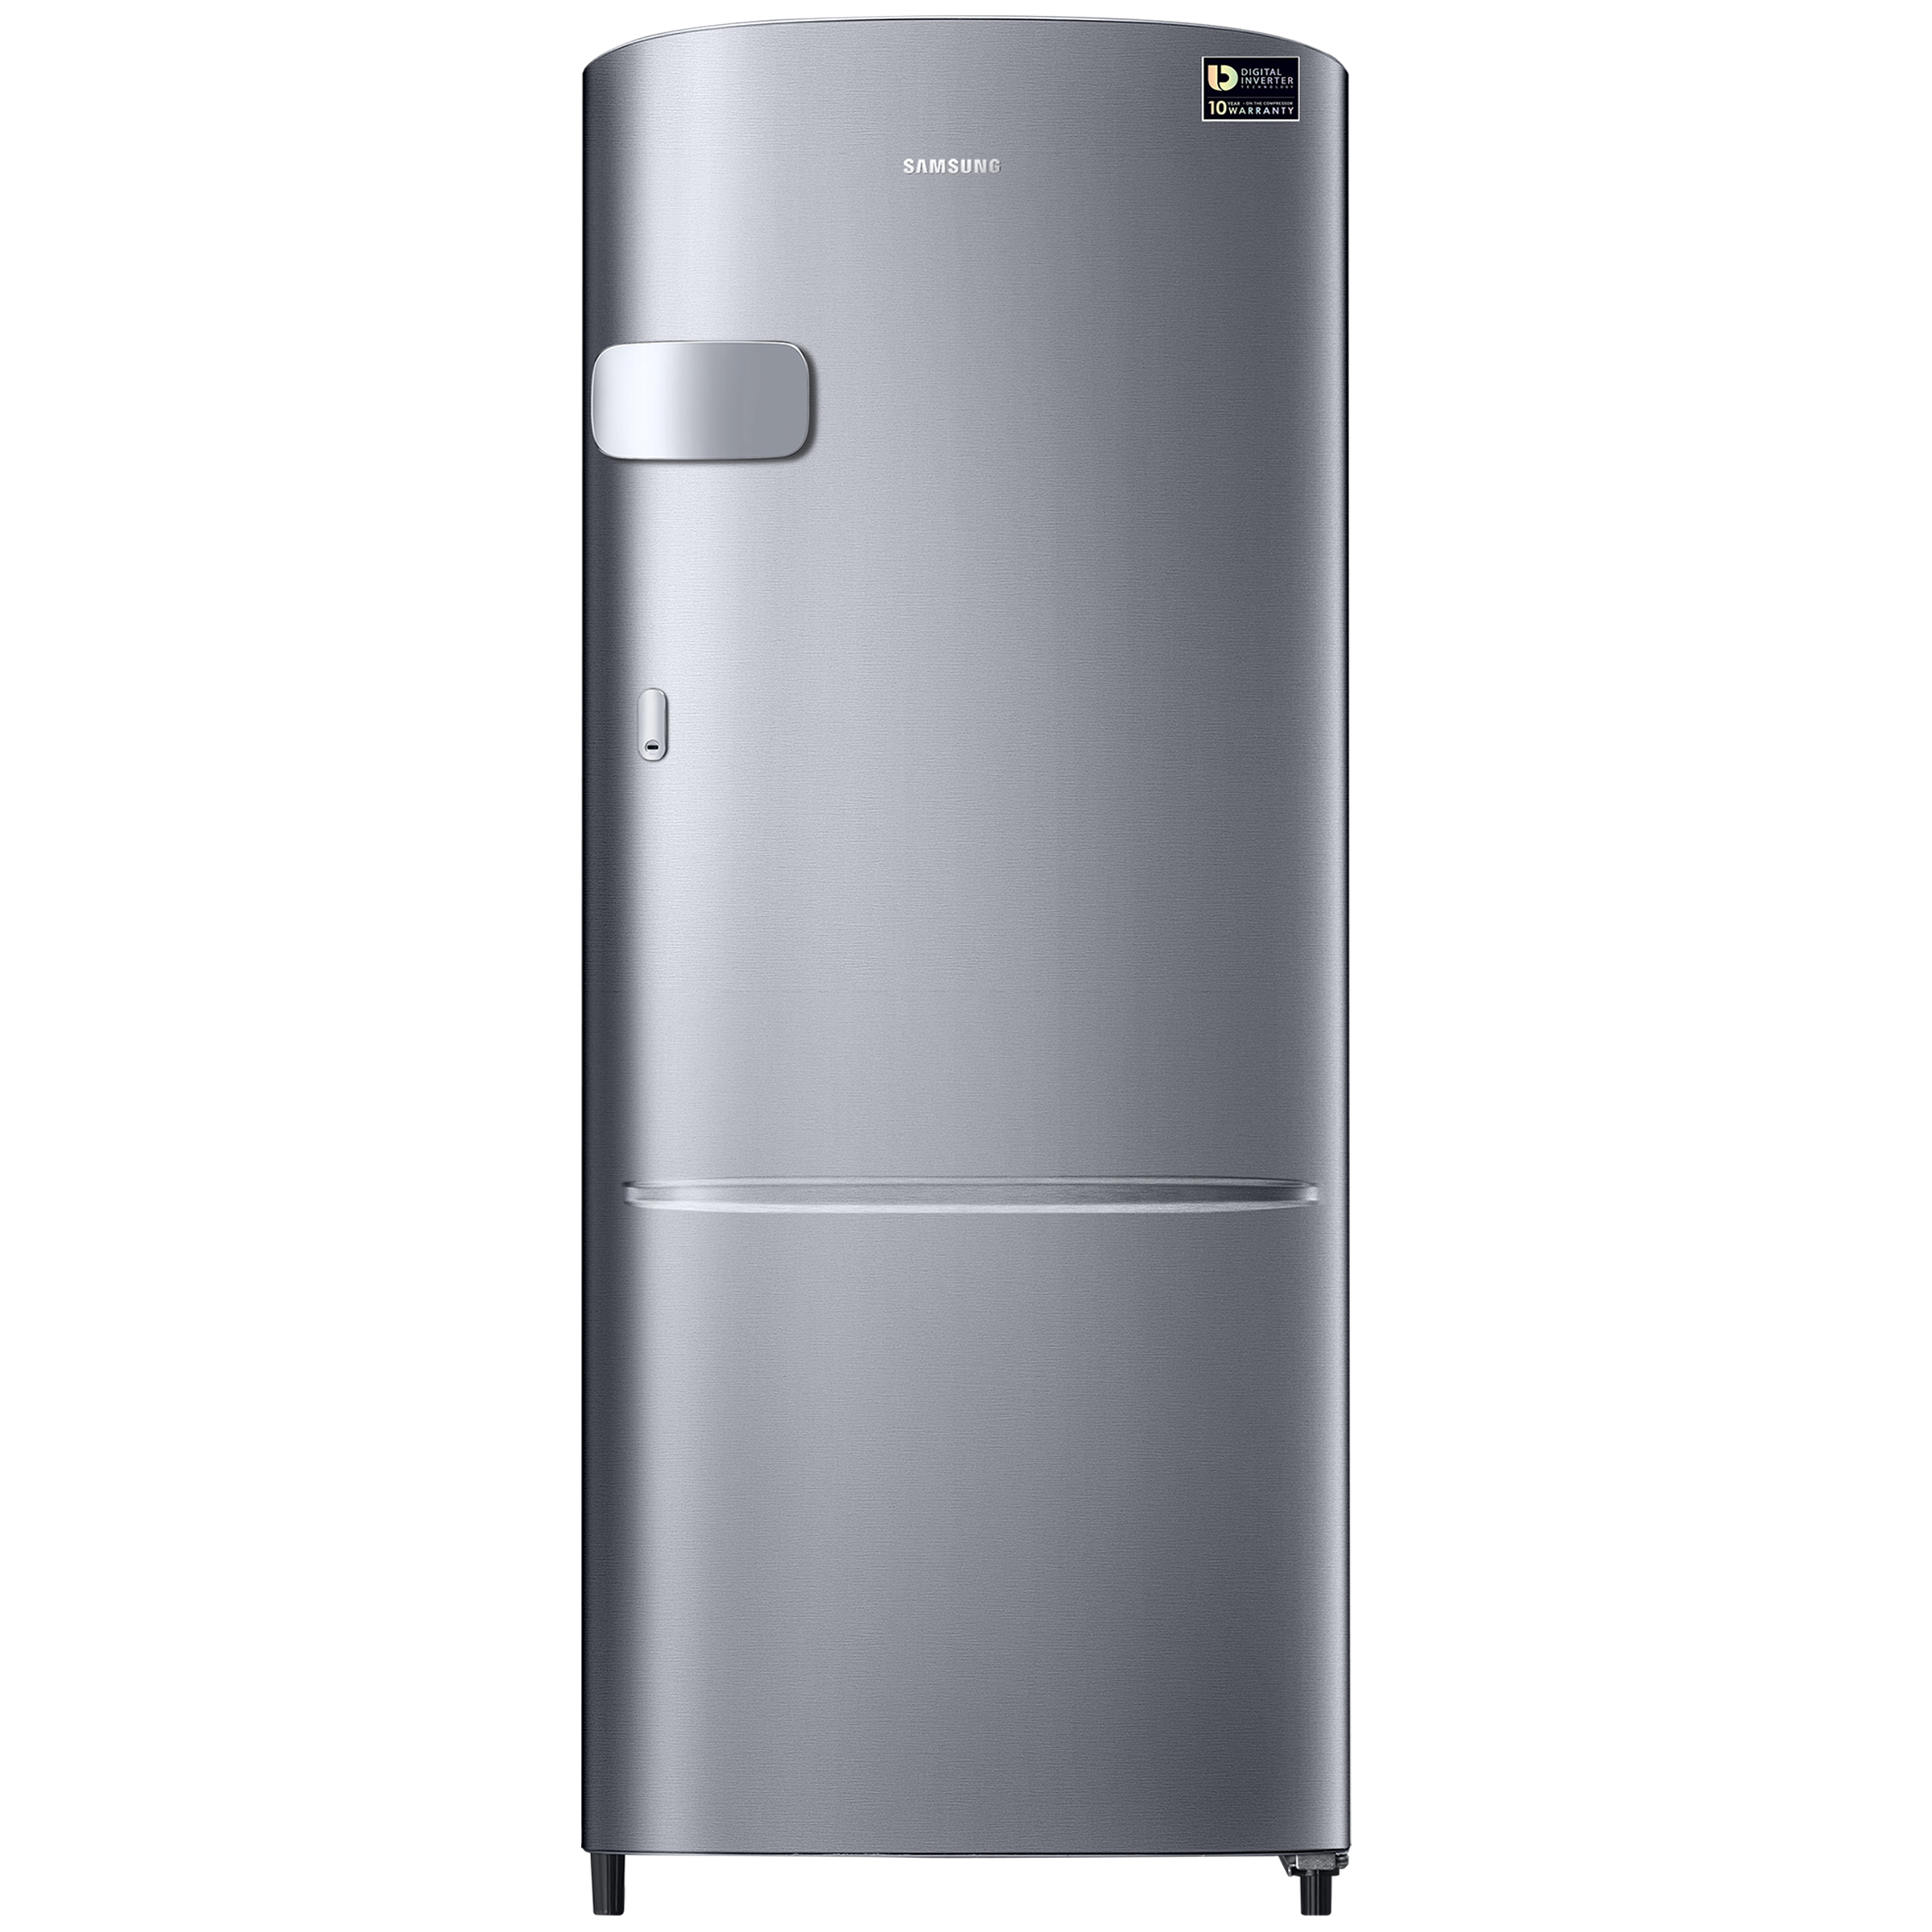 SAMSUNG 183 Litres 3 Star Single Door Refrigerator with Automatic Cooling Technology (RR20C1Y23S8/HL, Elegant Inox)_1